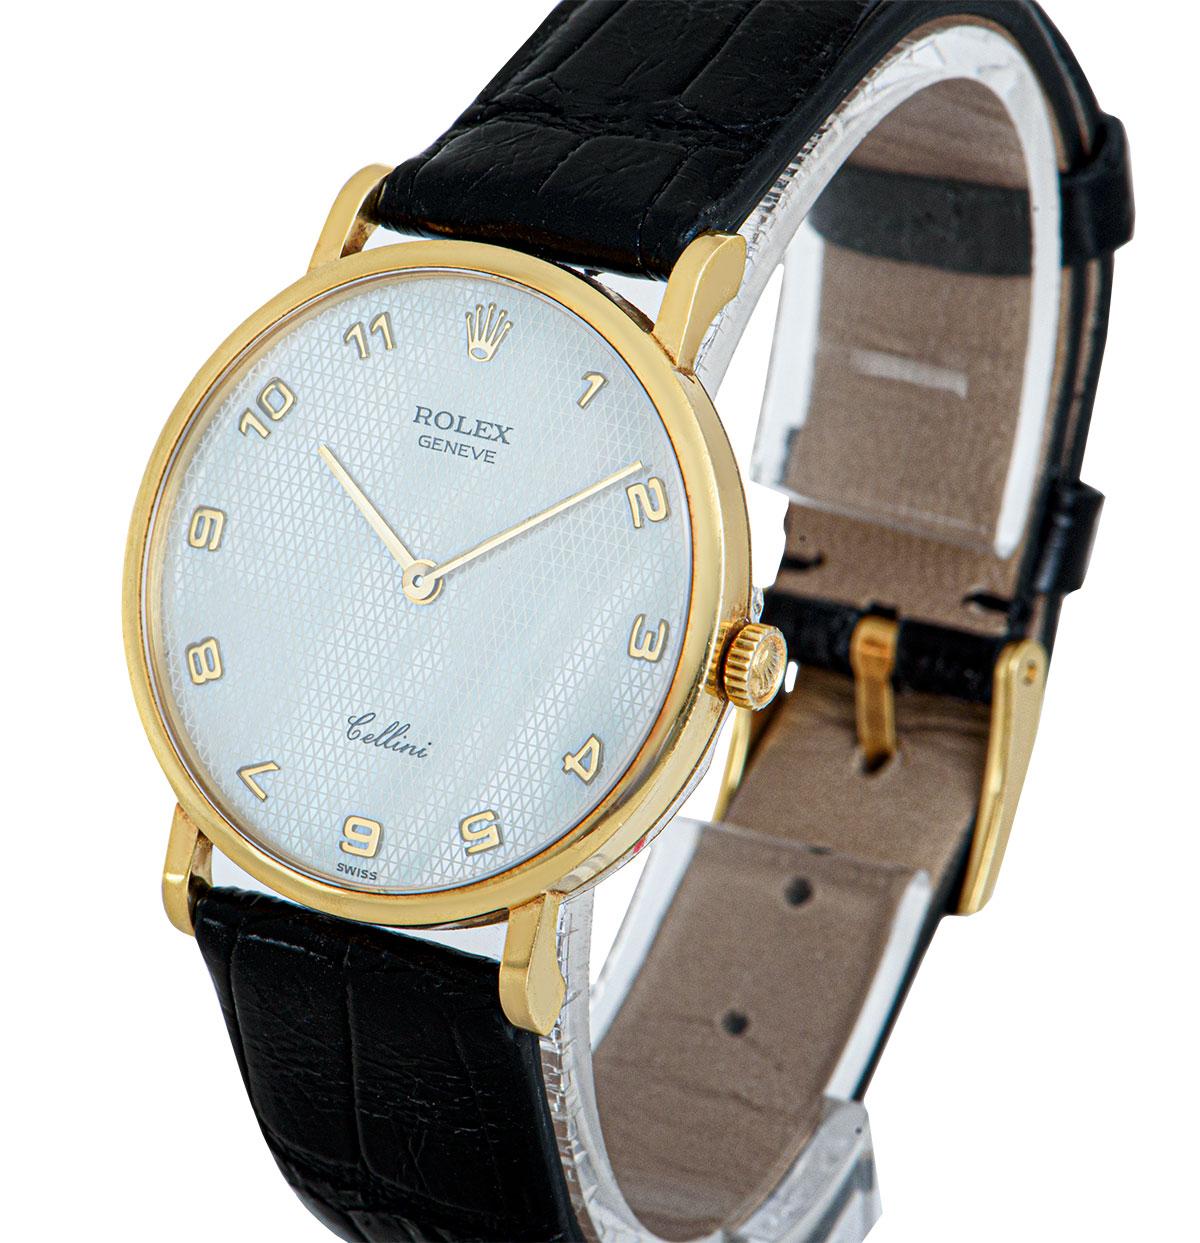 A 32 mm 18k Yellow Gold Cellini Gents Wristwatch, white mother of pearl dial with applied arabic numbers, a fixed 18k yellow gold bezel, a black leather strap (not by Rolex) with an original 18k yellow gold pin buckle, sapphire glass, manual wind